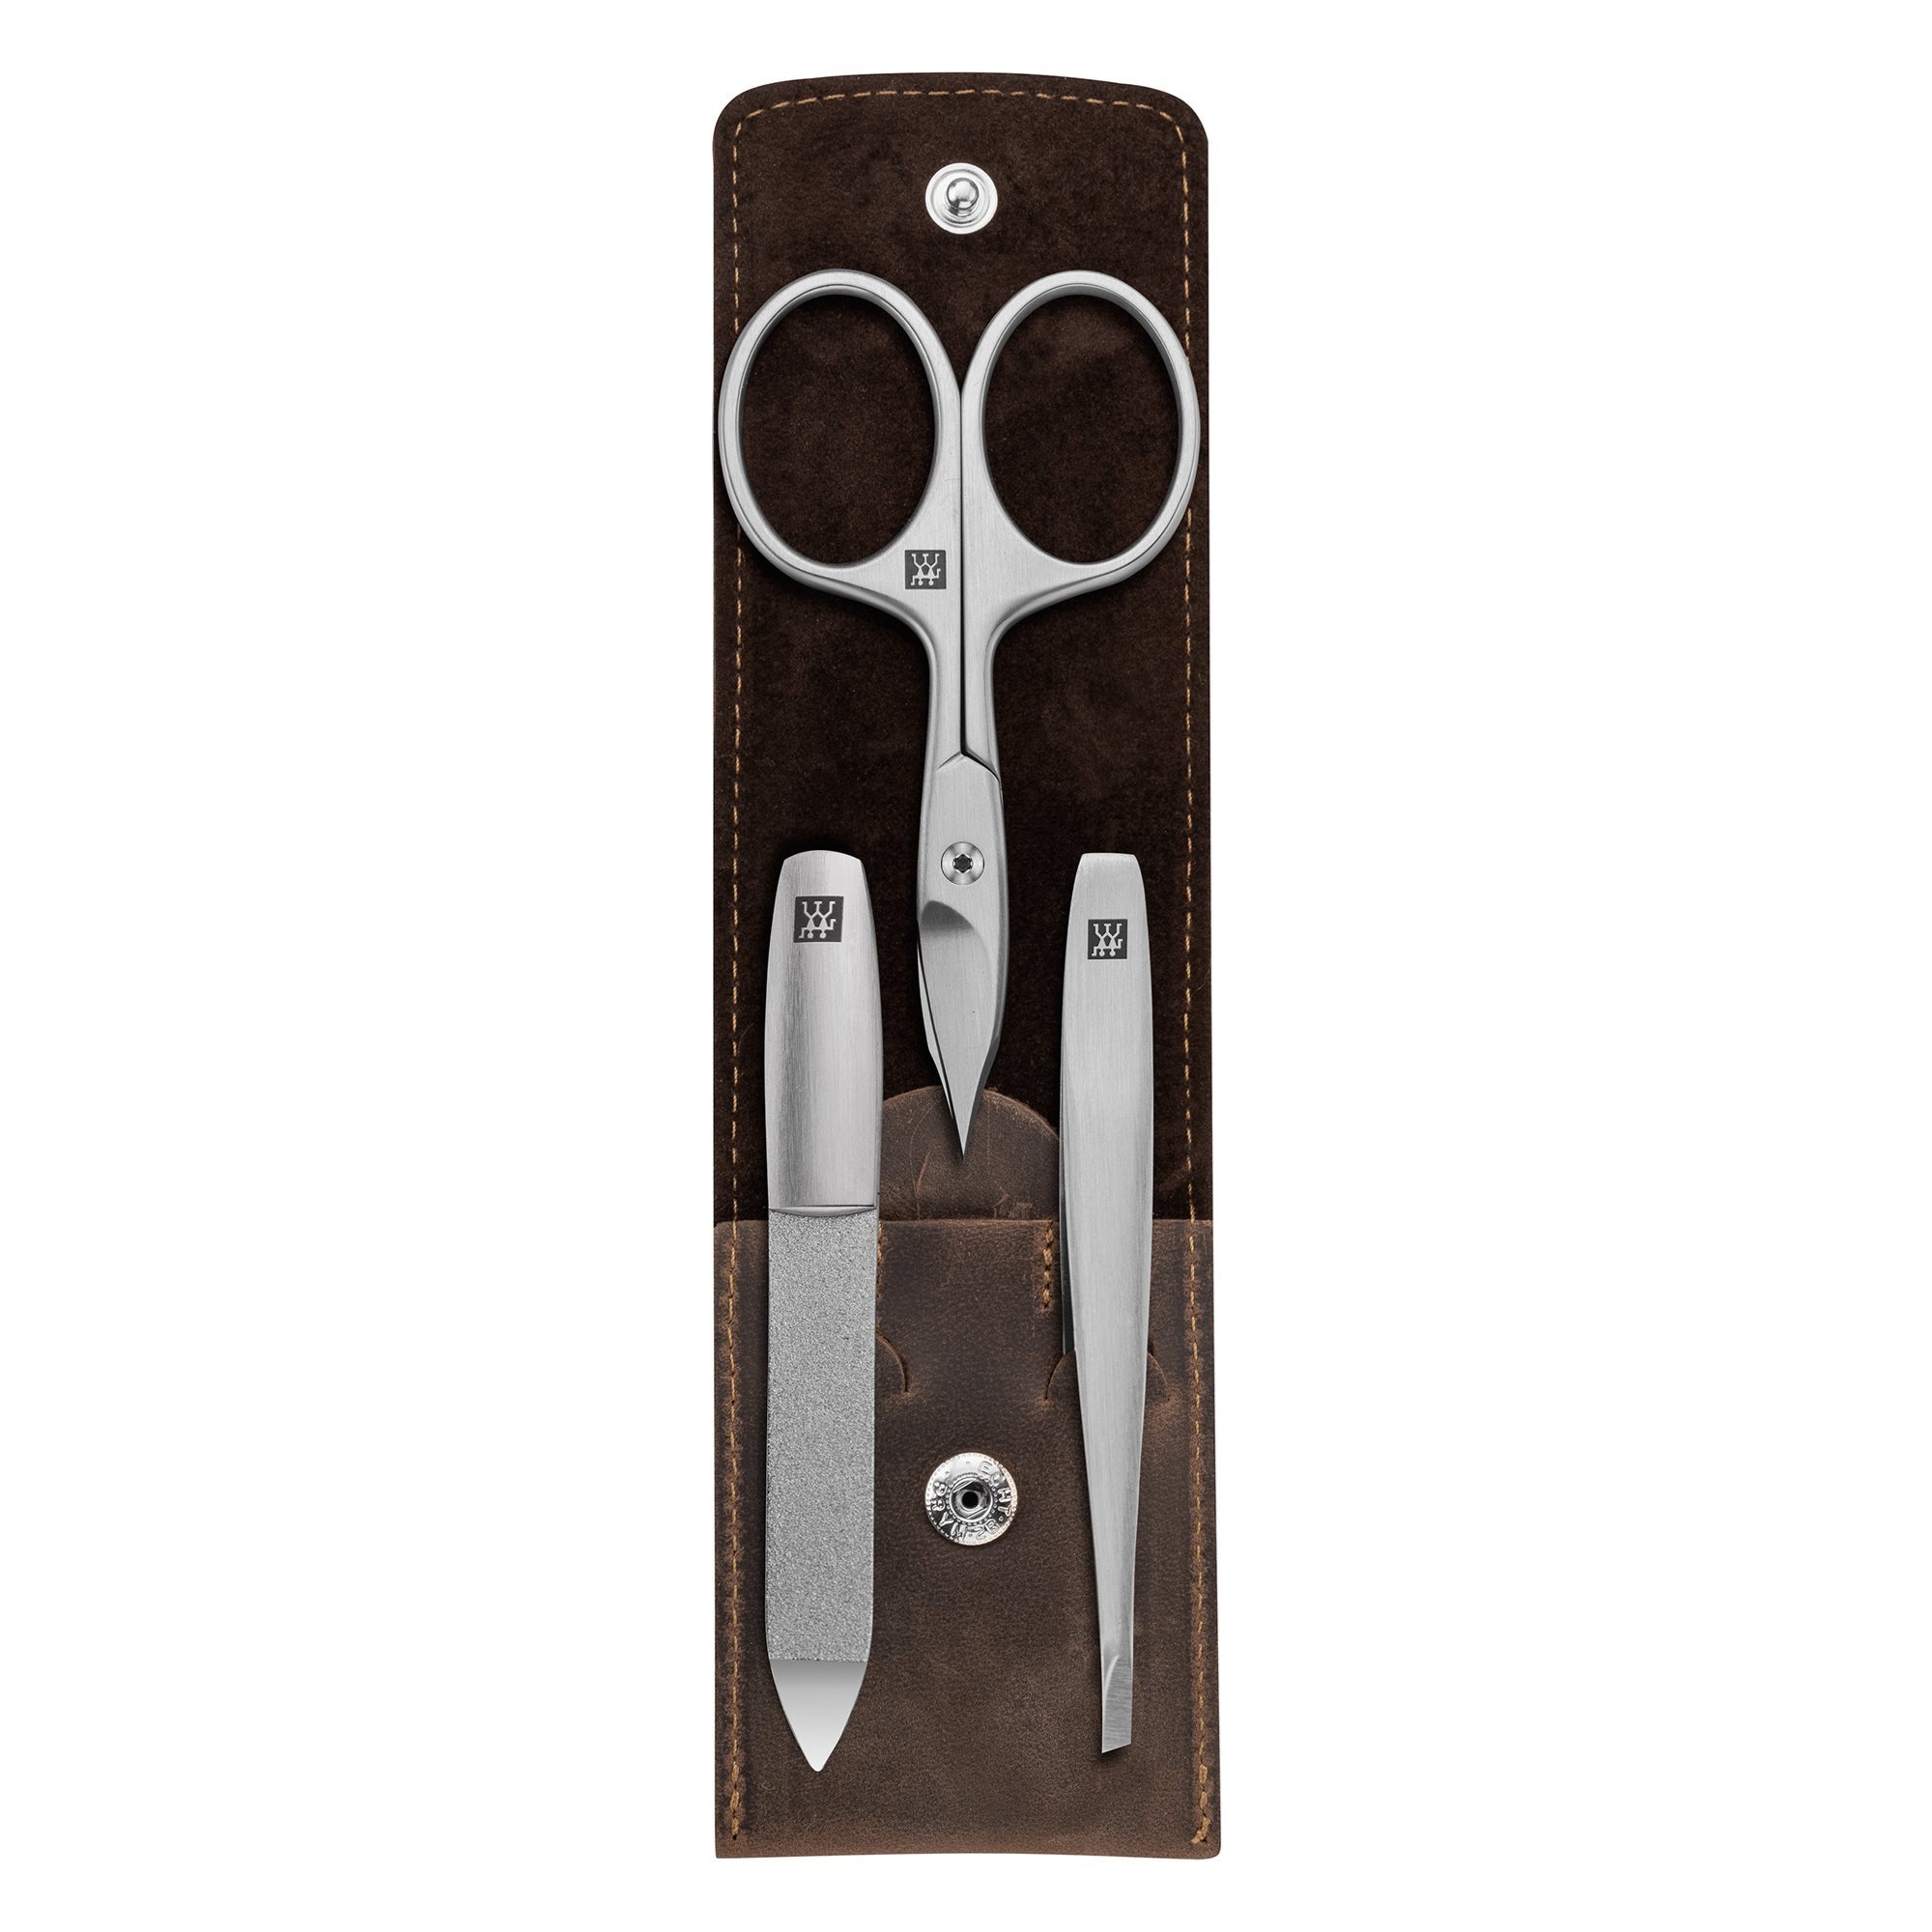 Manicure set, 3 pieces, stainless steel, brown leather case, PREMIUM -  Zwilling | KitchenShop